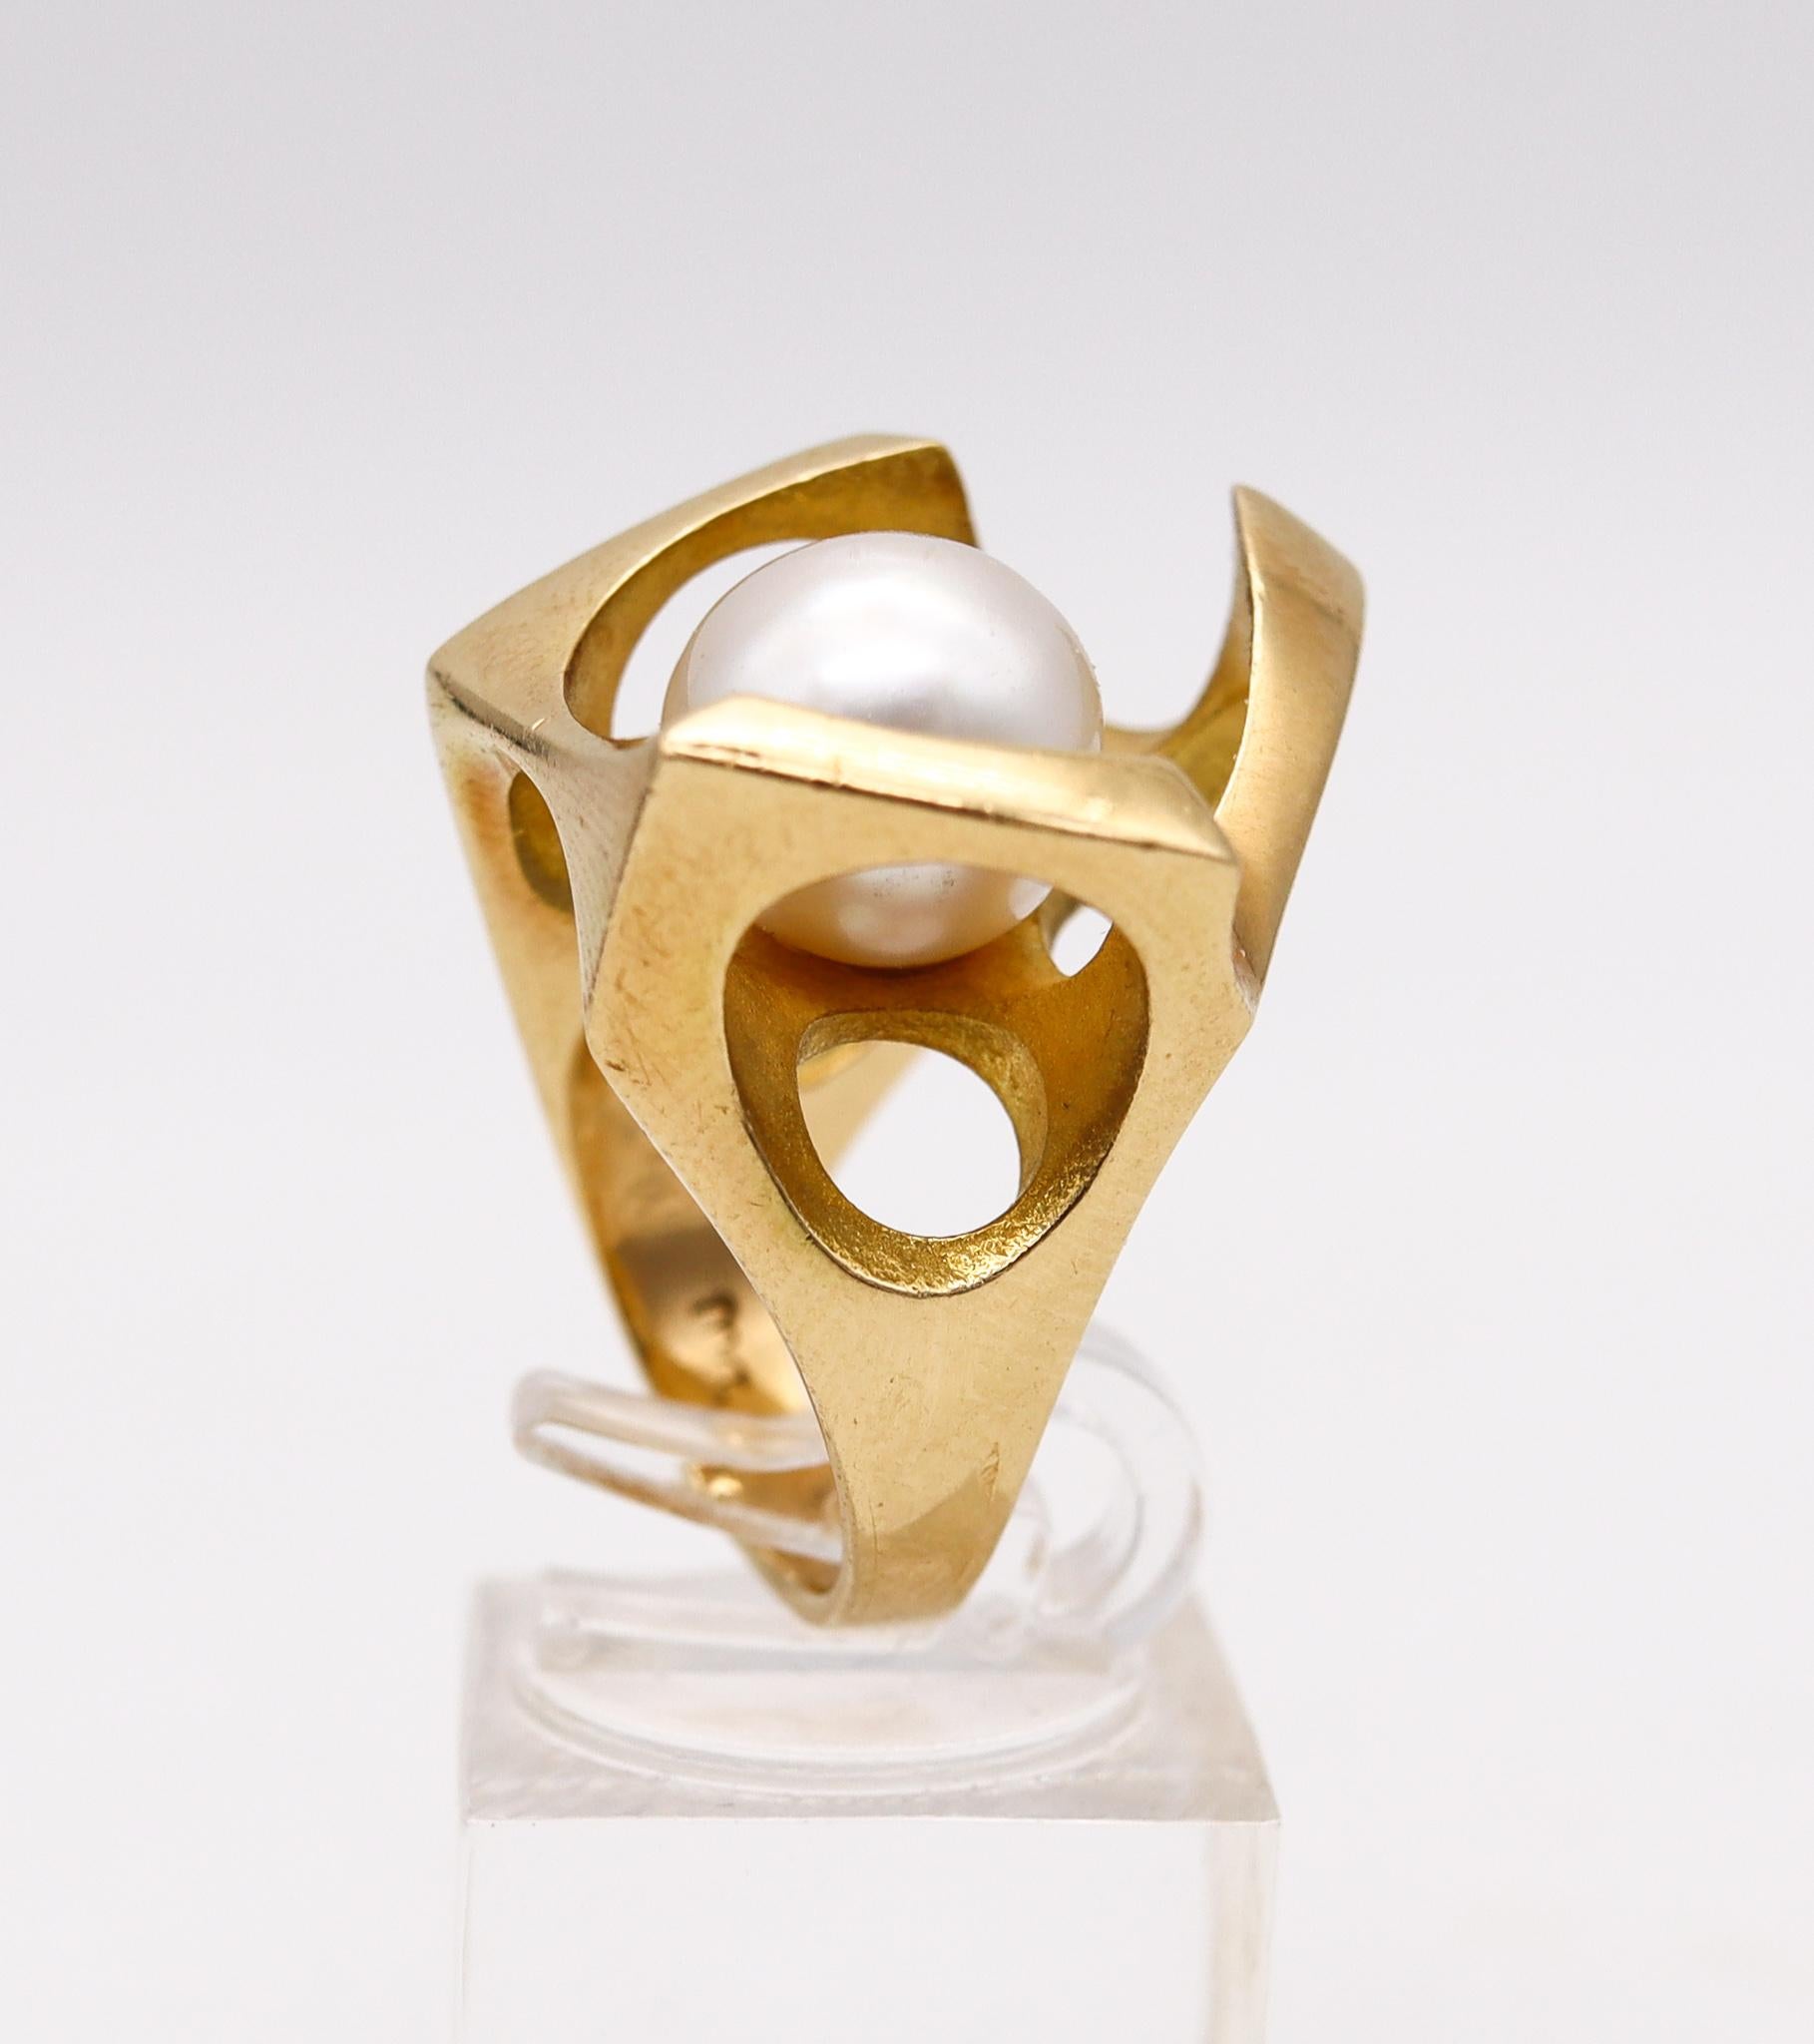 Designer Sculptural Biomorphic Abstract Cocktail Ring 18Kt Gold with Akoya Pearl 1